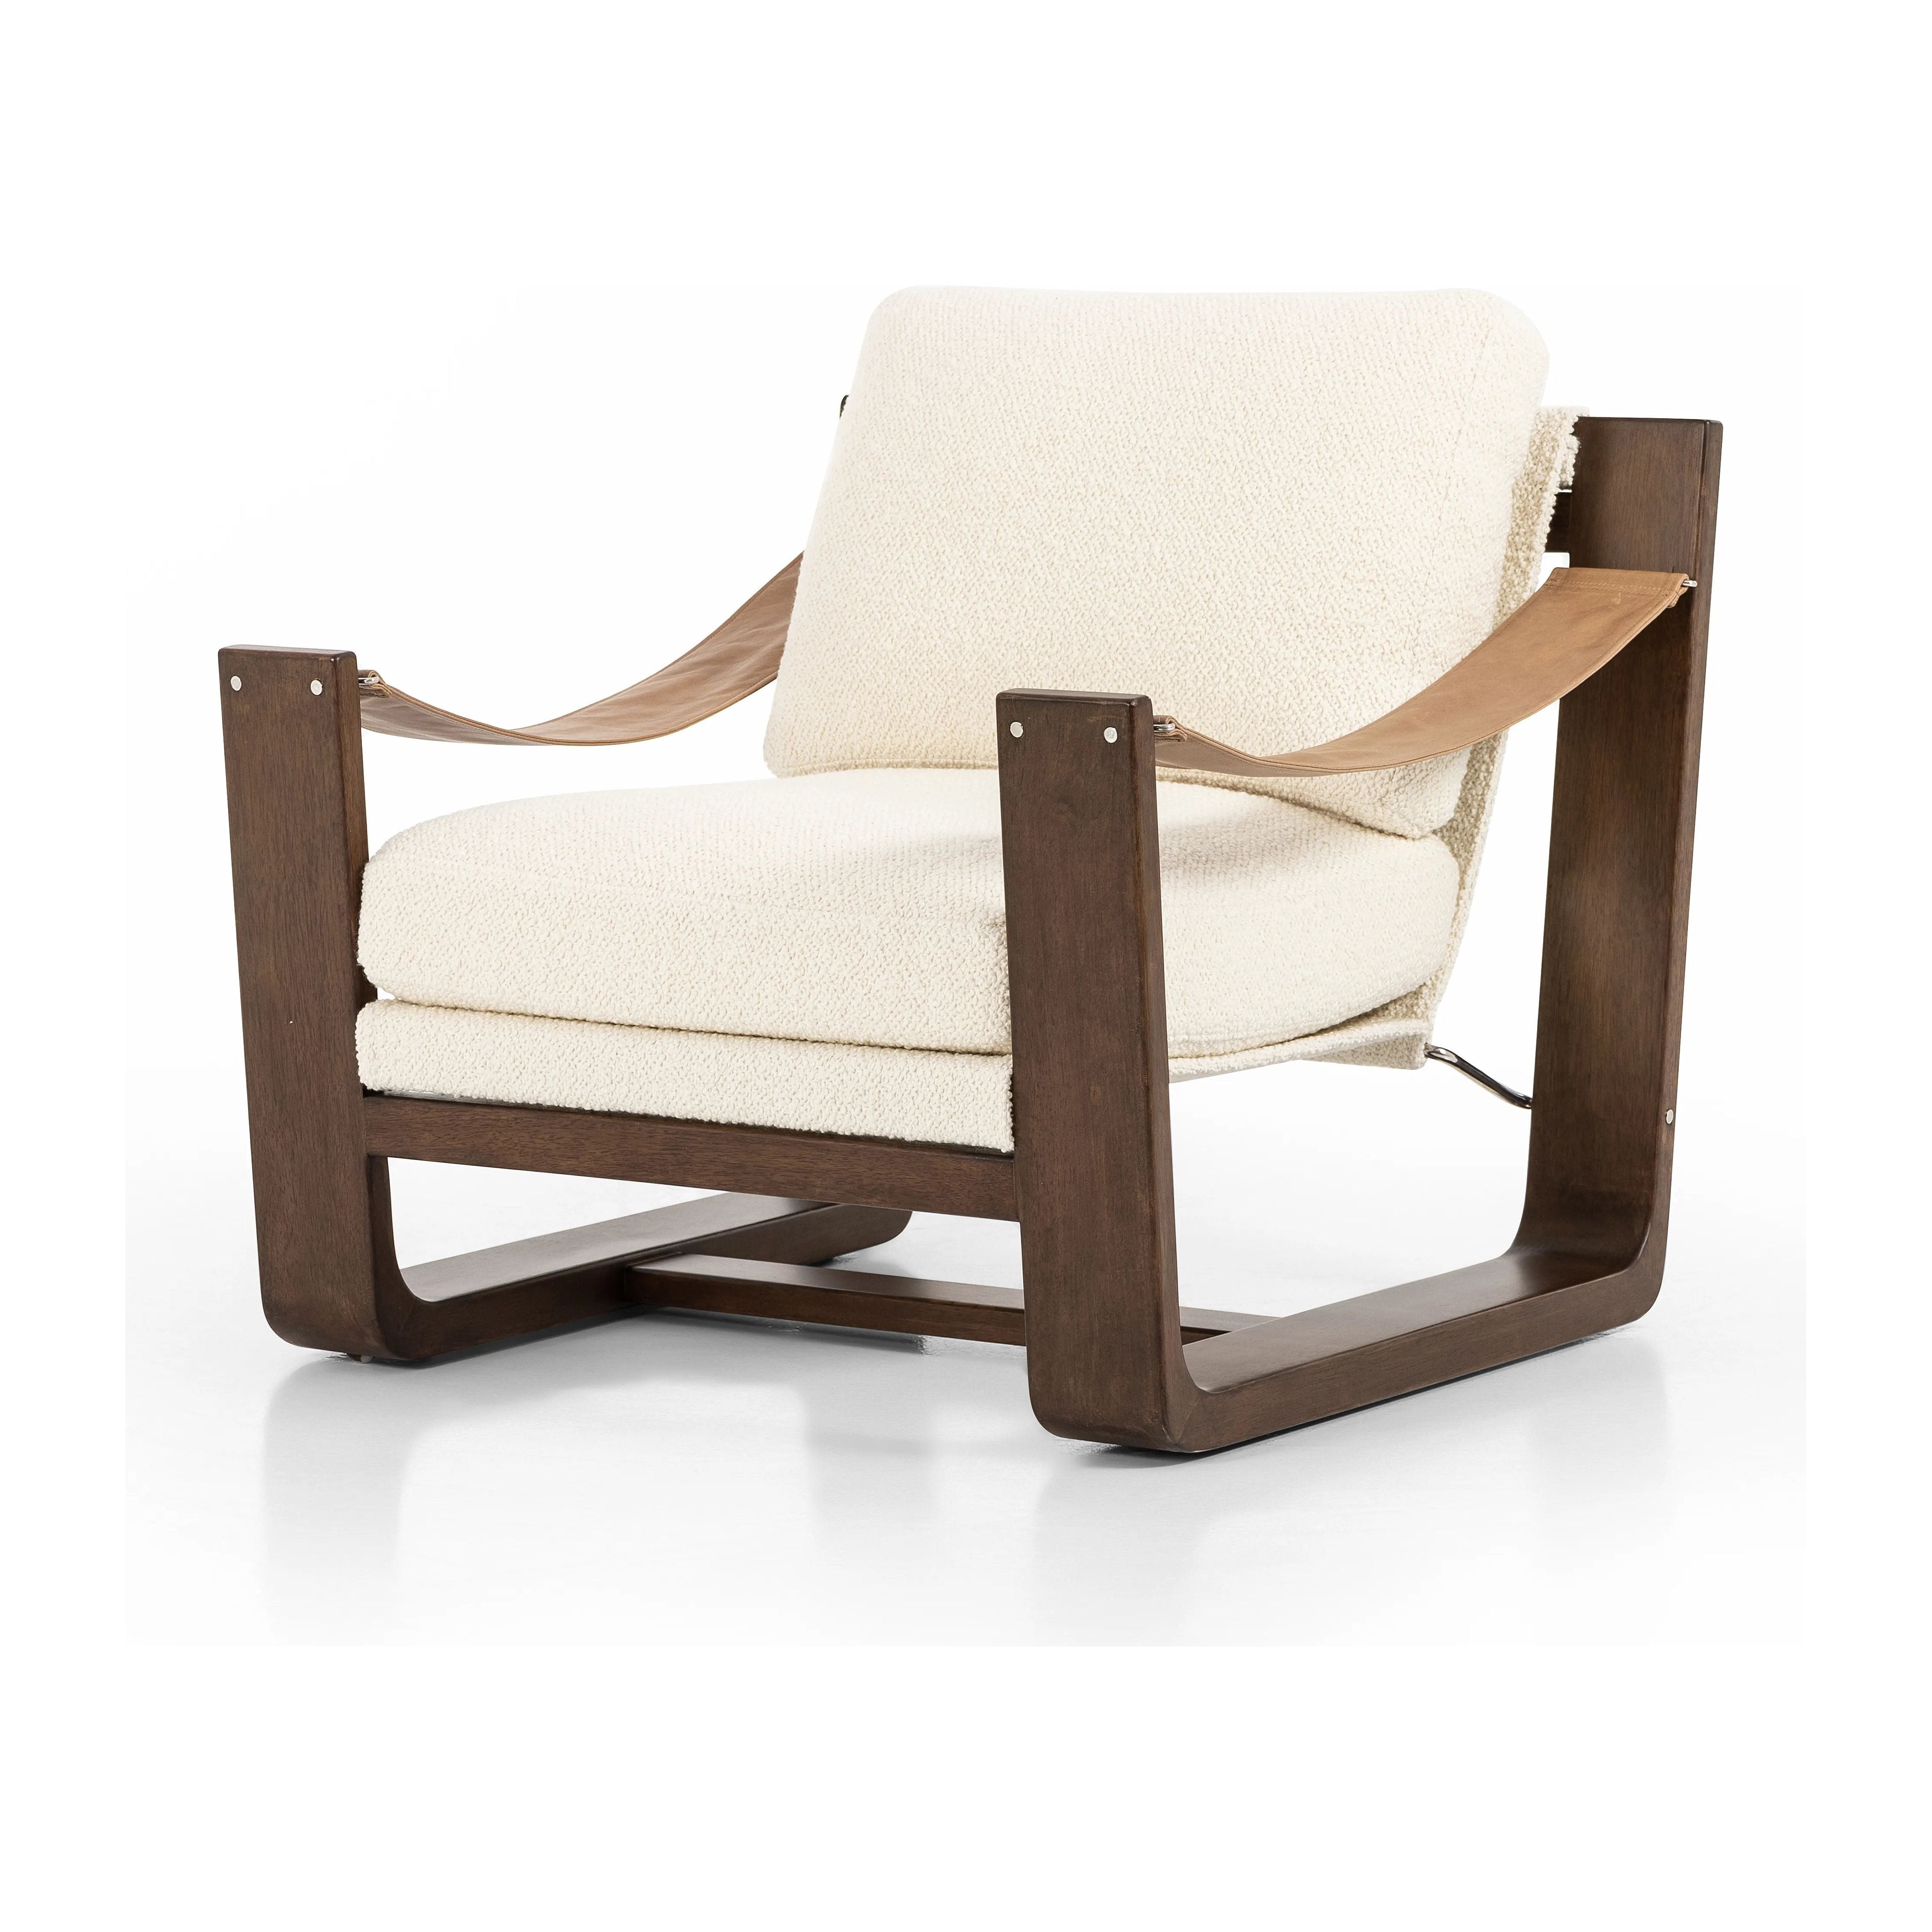 The classic sling chair gets a grand, elevated look. Solid wood frame is shaped, curved and smoothed on all edges. Cushioned seat and back are upholstered in top-grain leather. Amethyst Home provides interior design, new home construction design consulting, vintage area rugs, and lighting in the Alpharetta metro area.